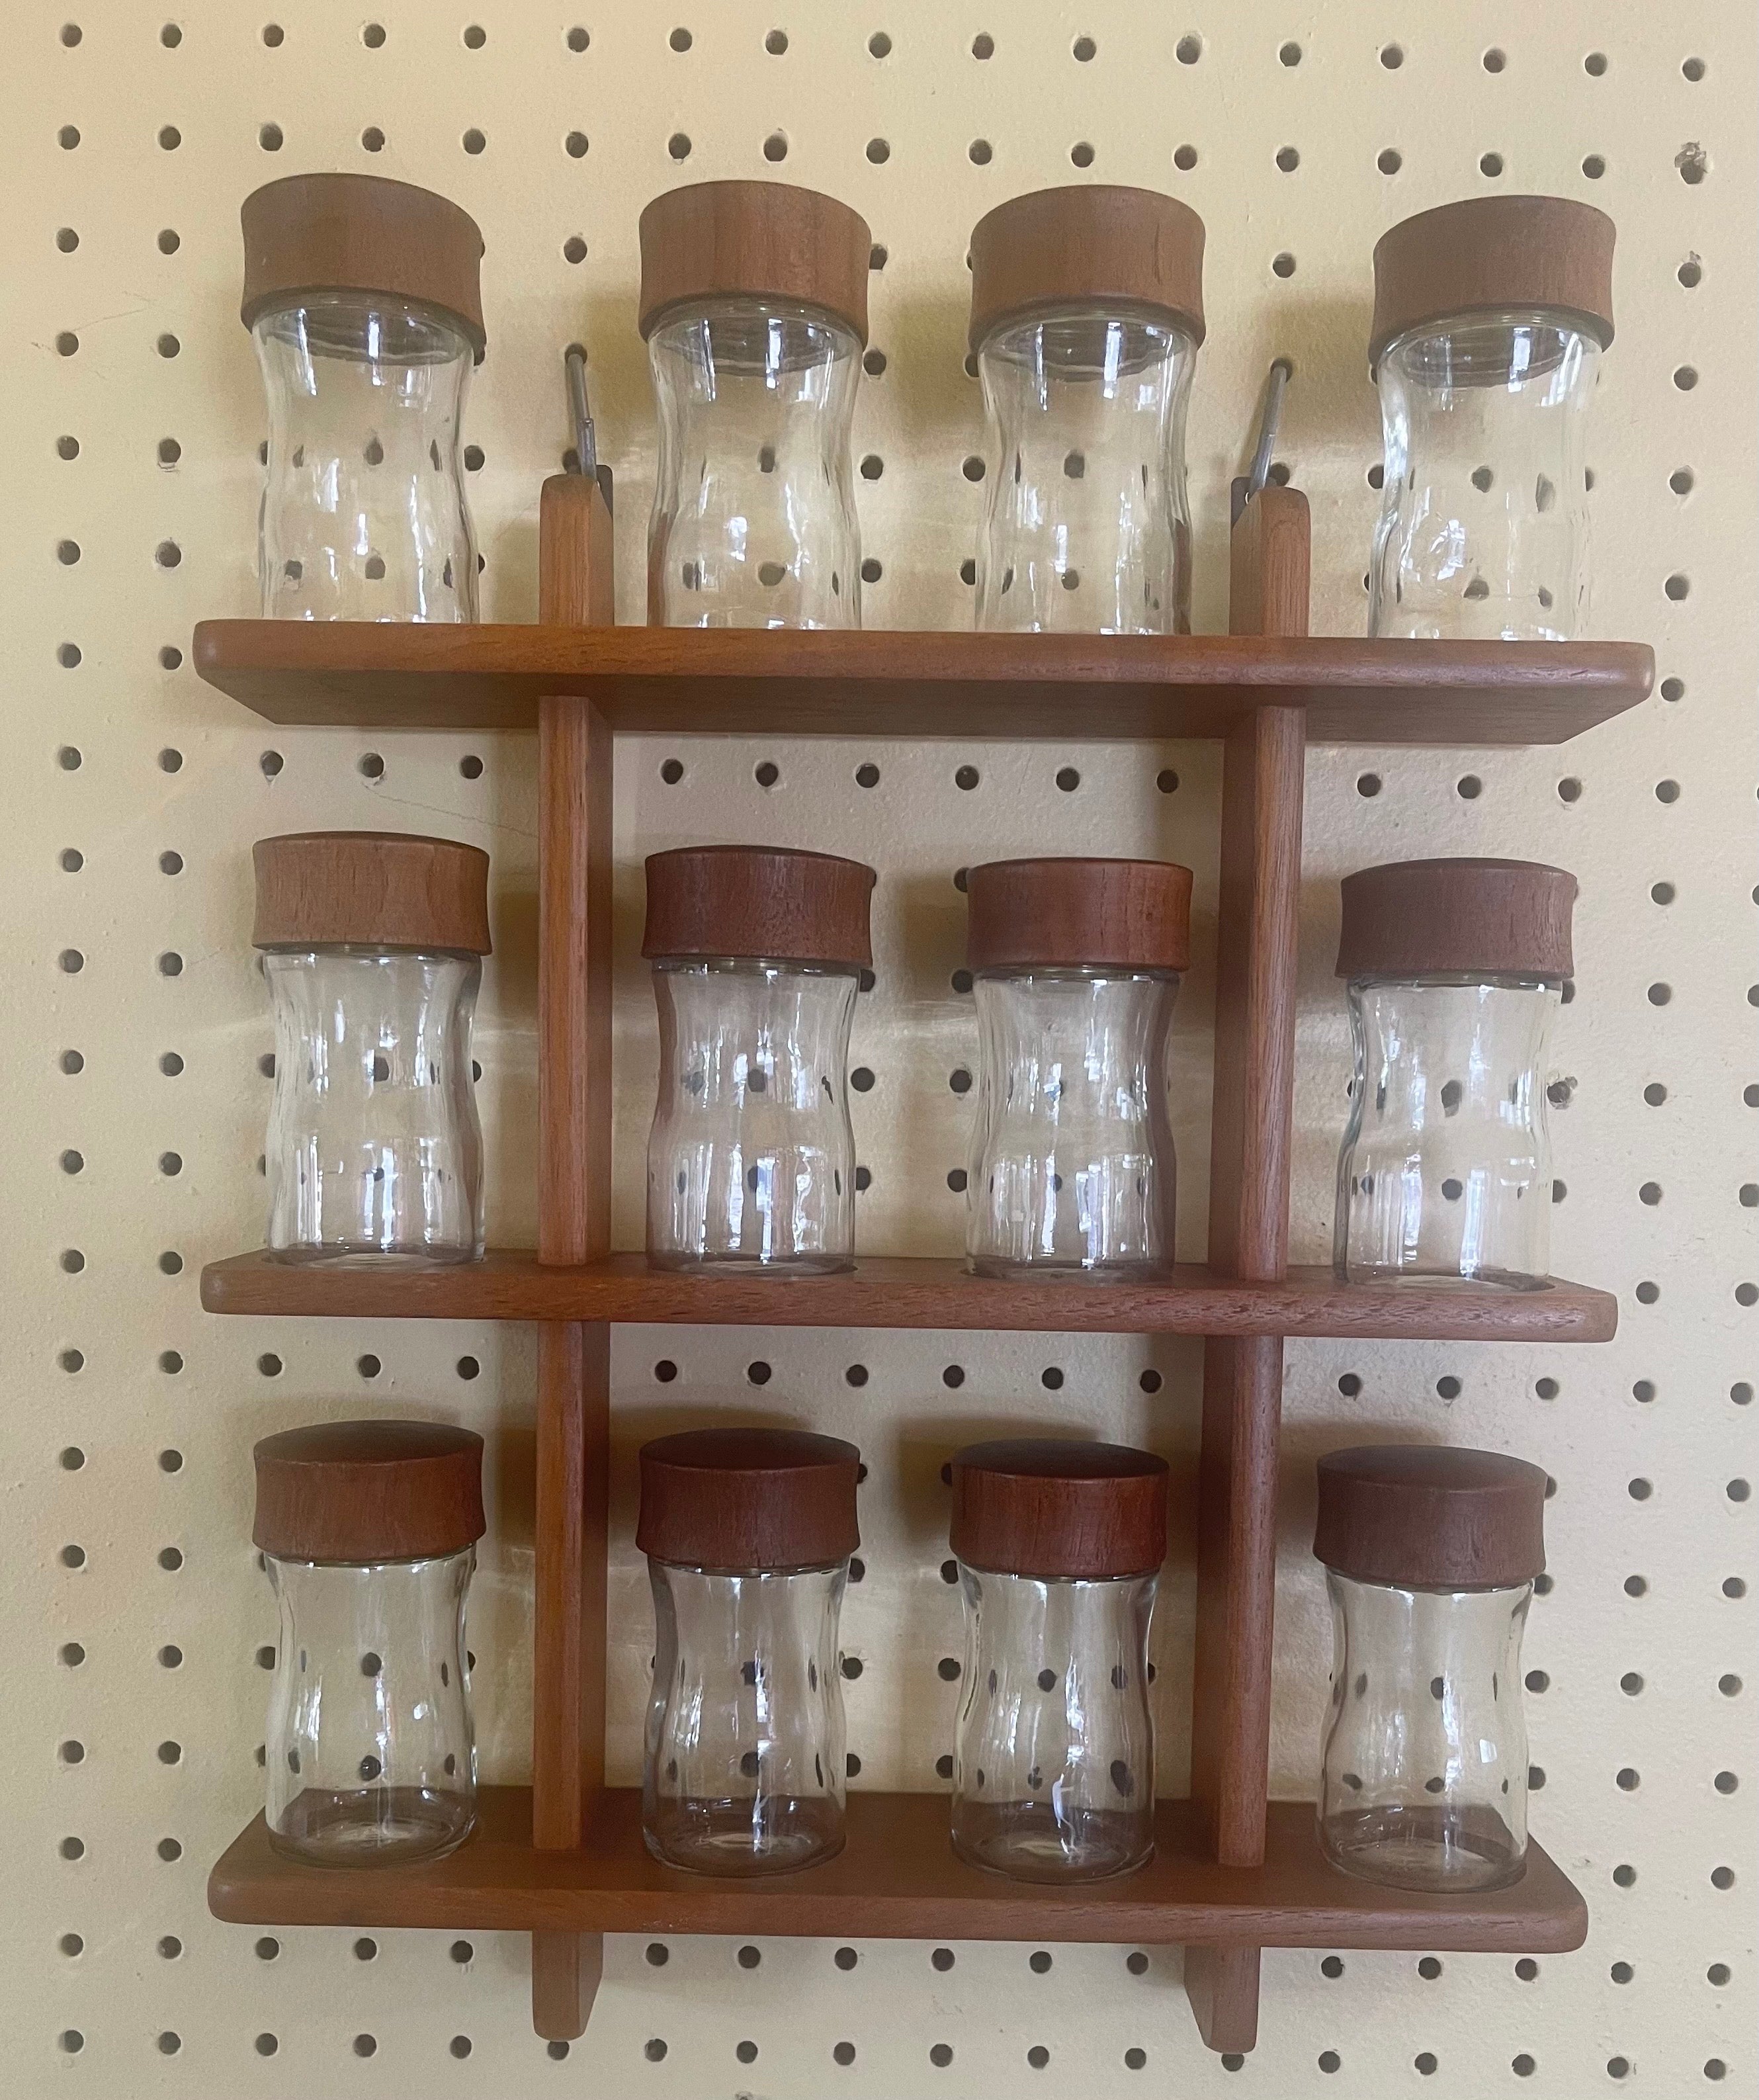 Danish modern twelve jar teak spice rack by Digsmed, circa 1960s. There are two racks available and they can be placed next to each other on a wall to make a much bigger 24 jar set. The racks are in great vintage condition and measures 12.75